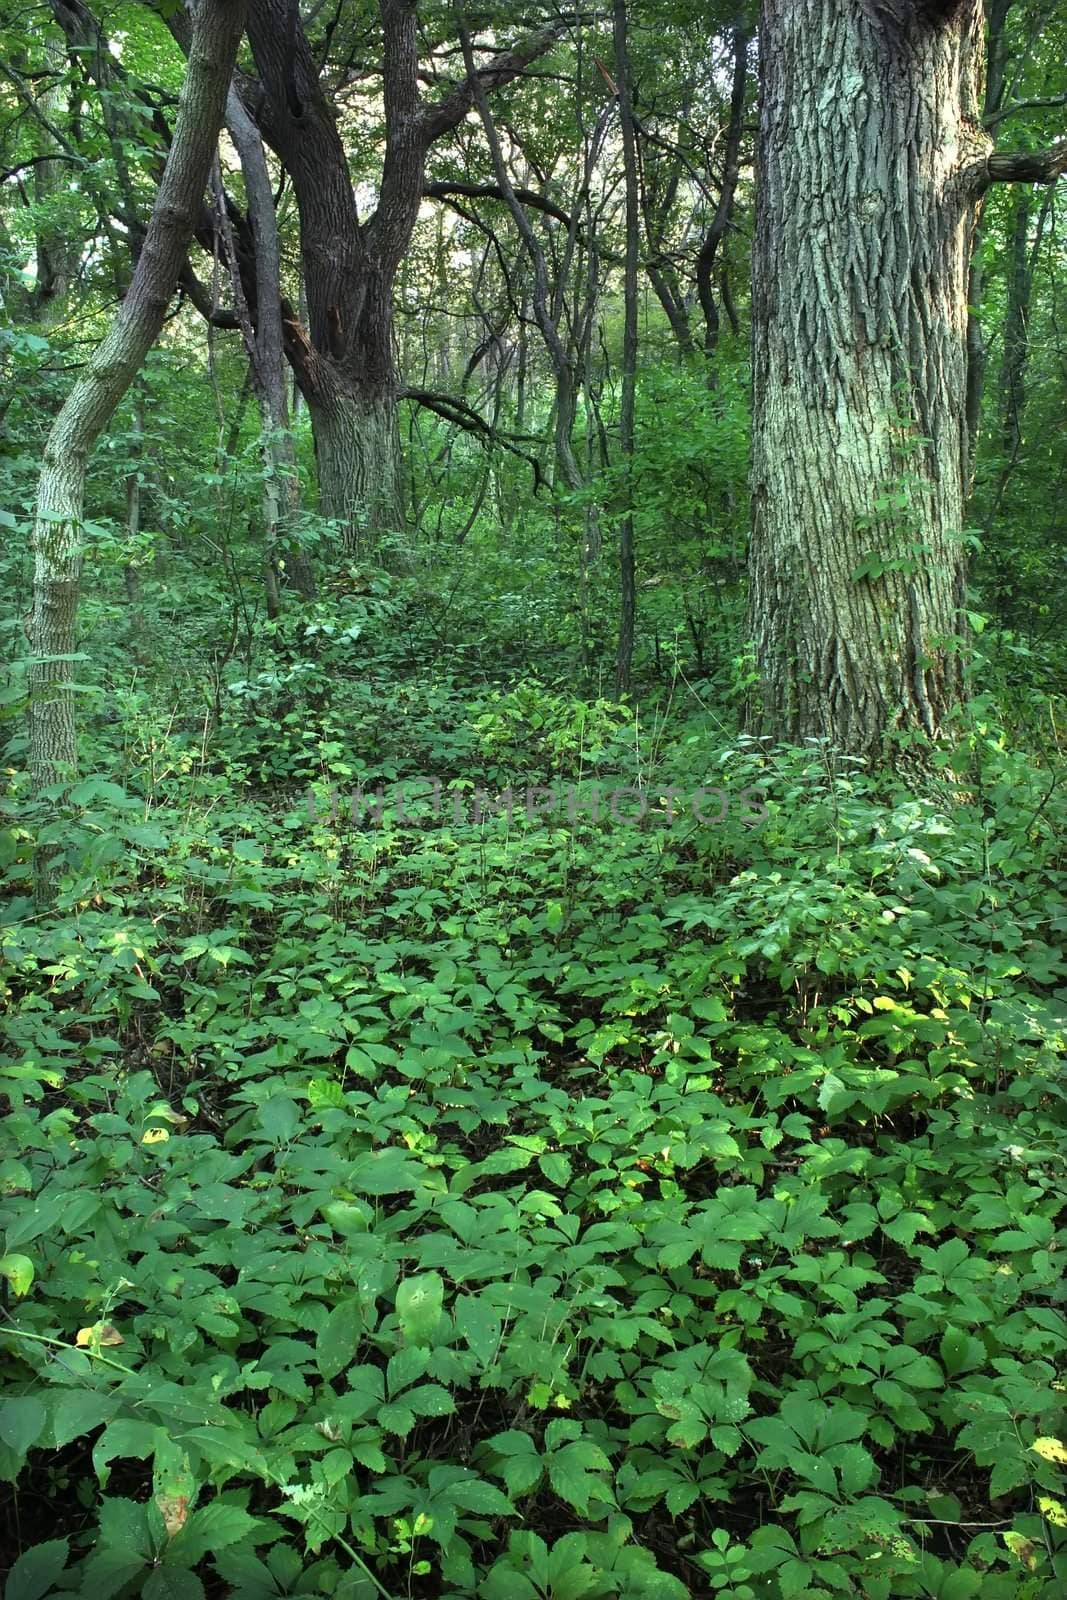 Dense understory vegetation covers the forest floor at Rock Cut State Park in Illinois.